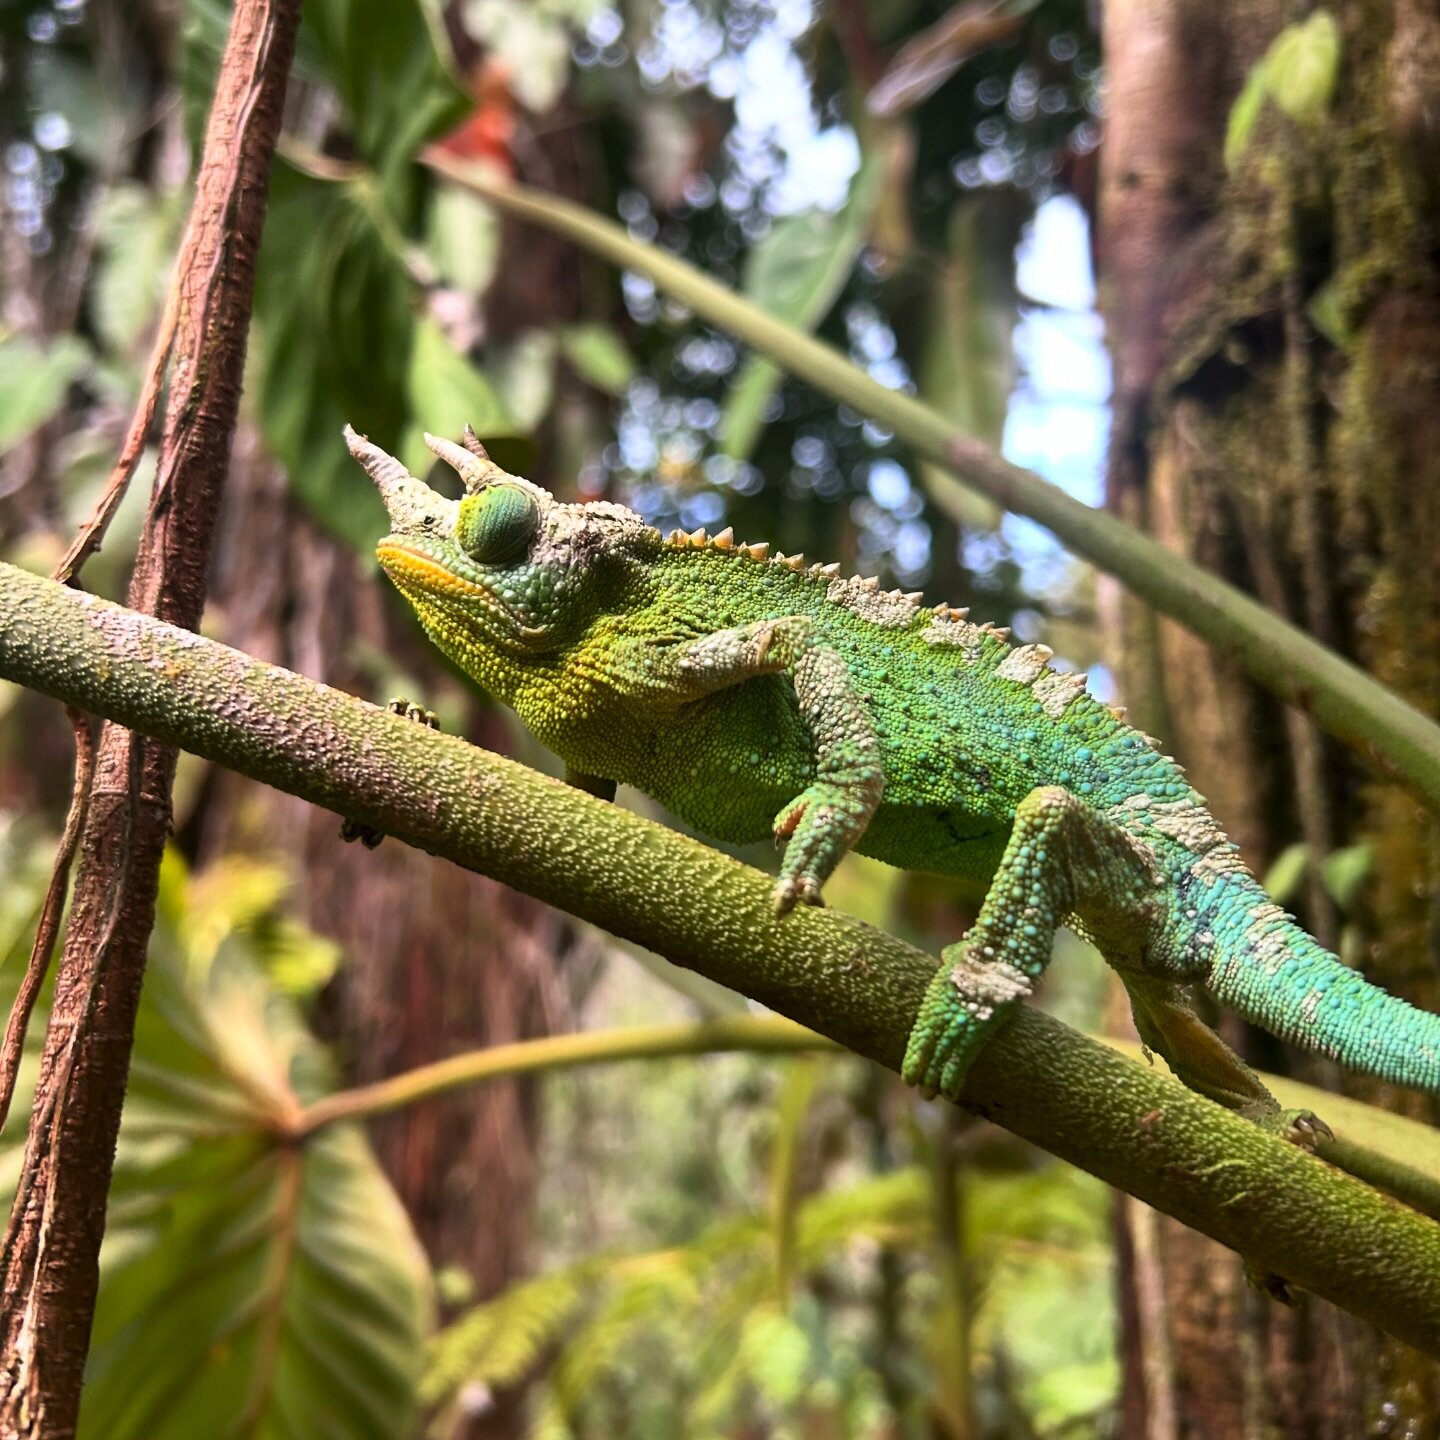 Have you ever spotted a Jackson Chameleon? They love to climb trees and are experts at blending in when they aren&rsquo;t on the go!

Males are generally 10-12&rdquo; long with a long, prehensile tail accounting for half of their length, and with thr